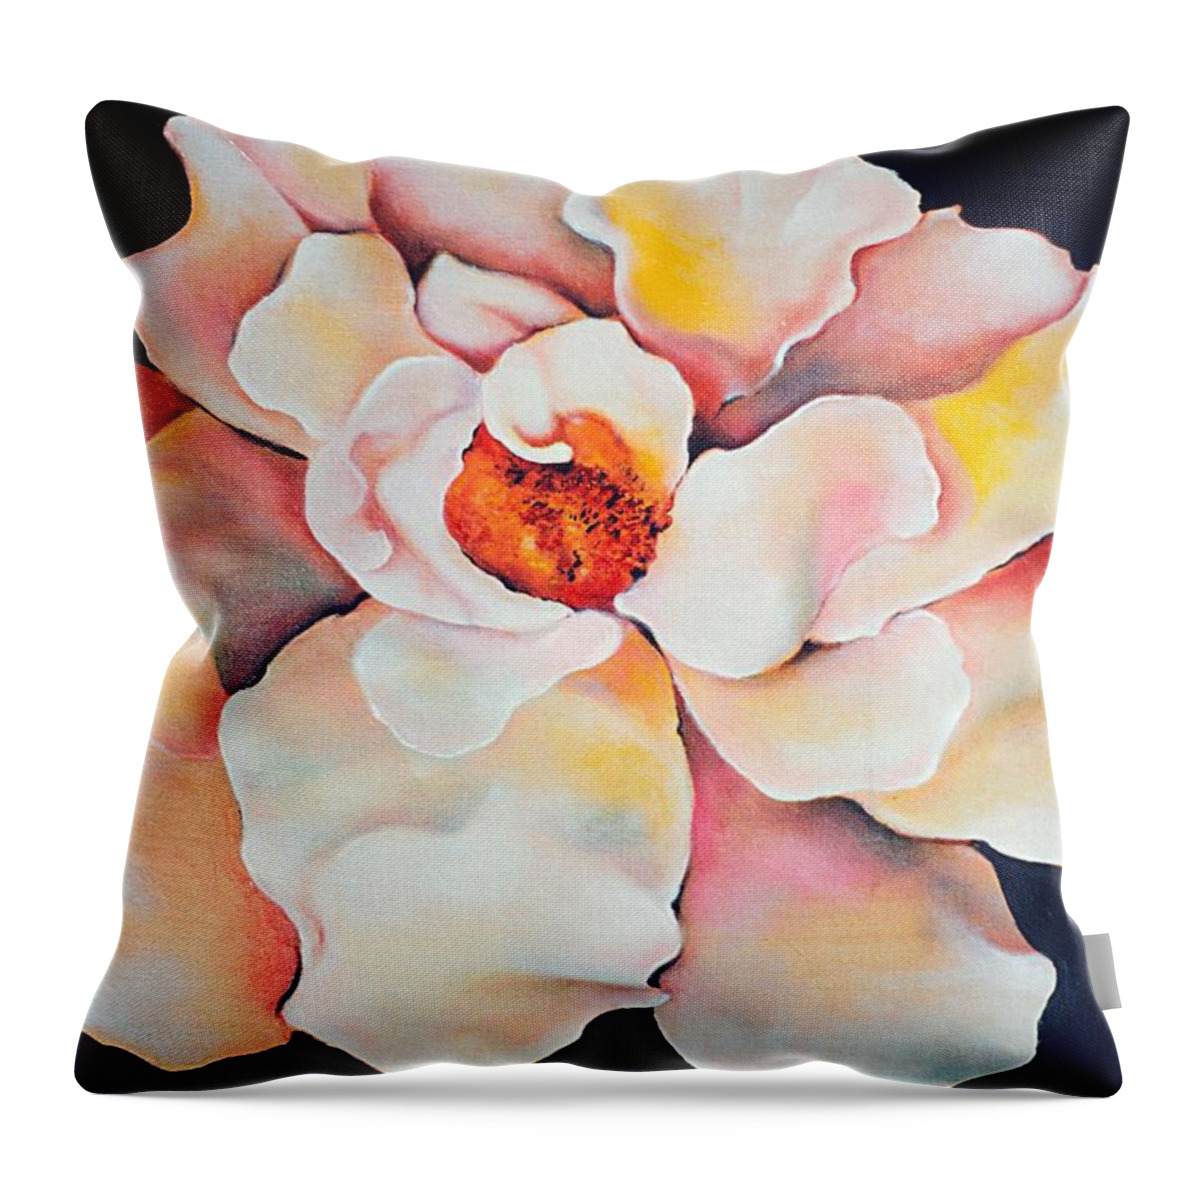 Large Floral Throw Pillow featuring the painting Butter Flower by Jordana Sands